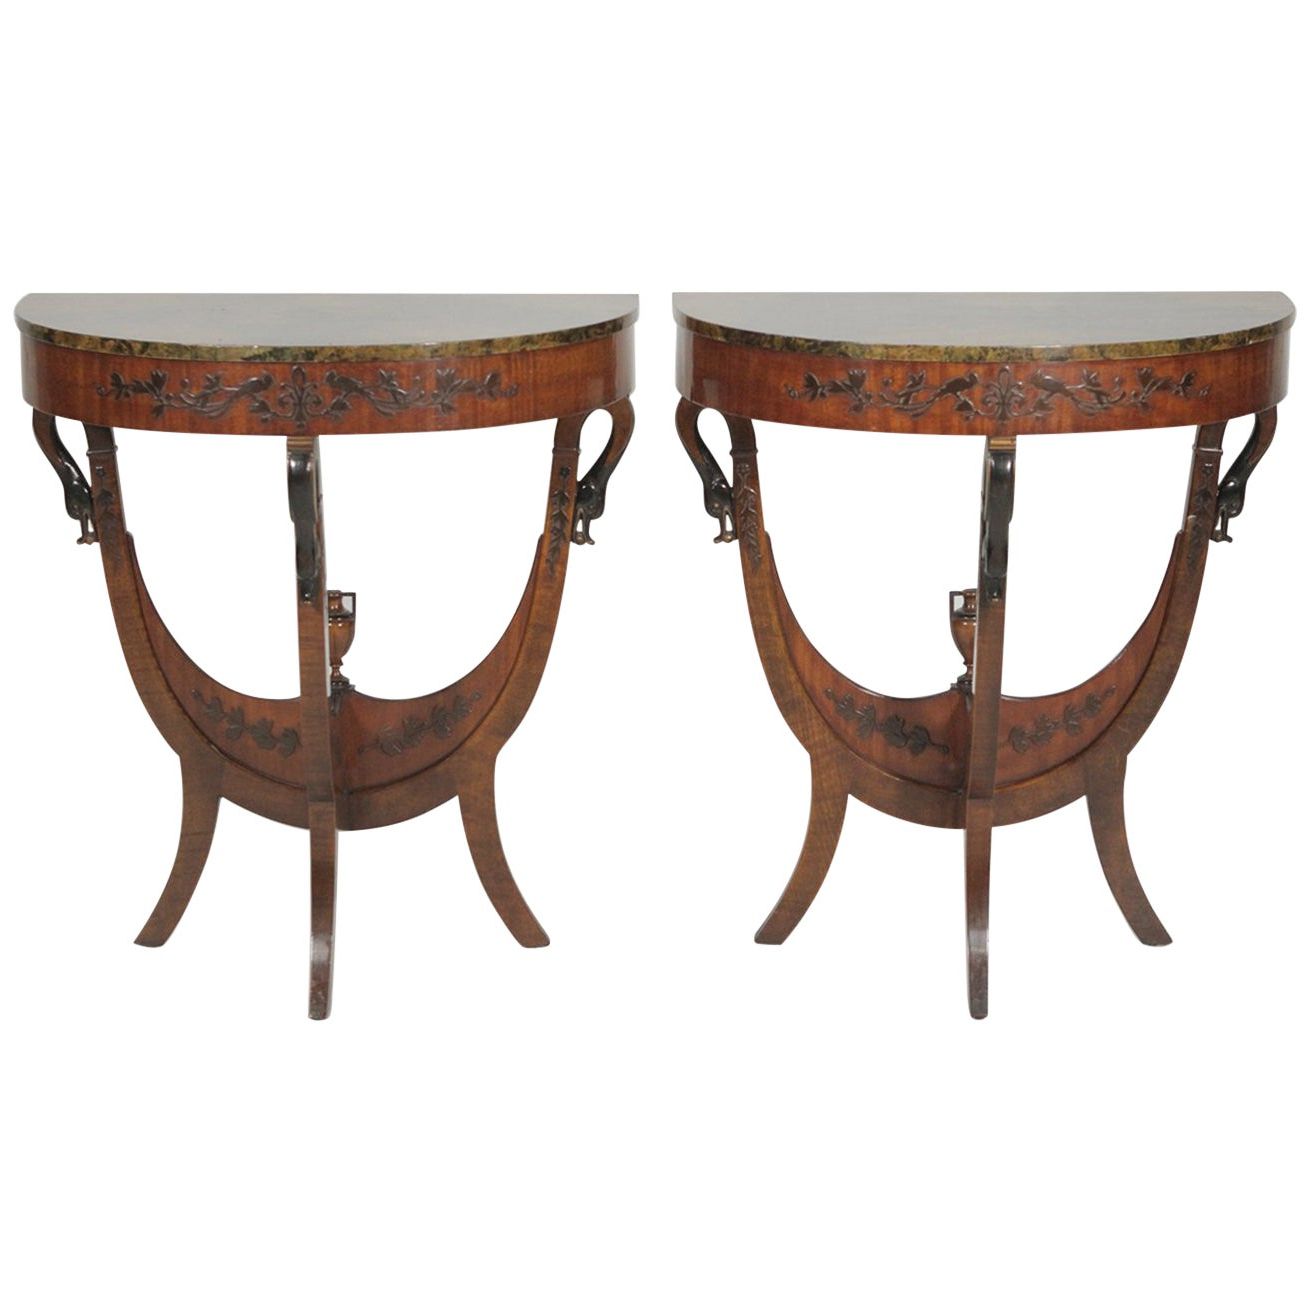 Round Console Tables For Best And Newest French Half Round Console Table At 1stdibs (View 6 of 10)